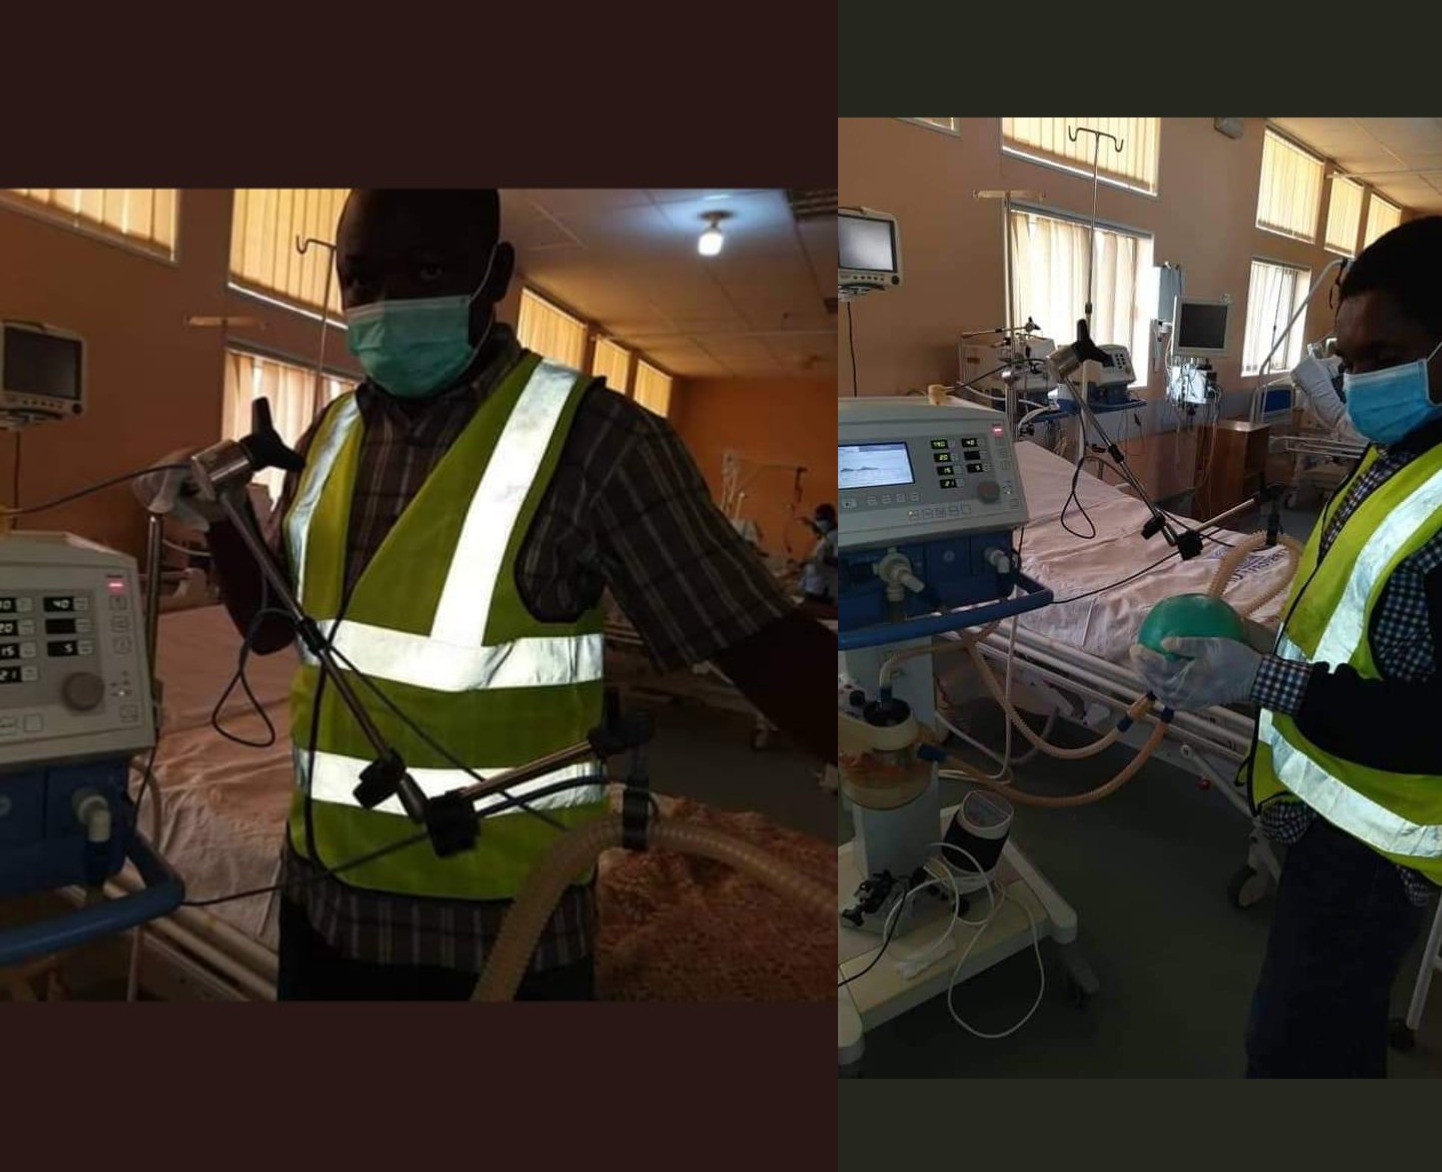 Two Nigerian men hailed as heroes after they fixed faulty ventilators for free as their contribution to curb Coronavirus